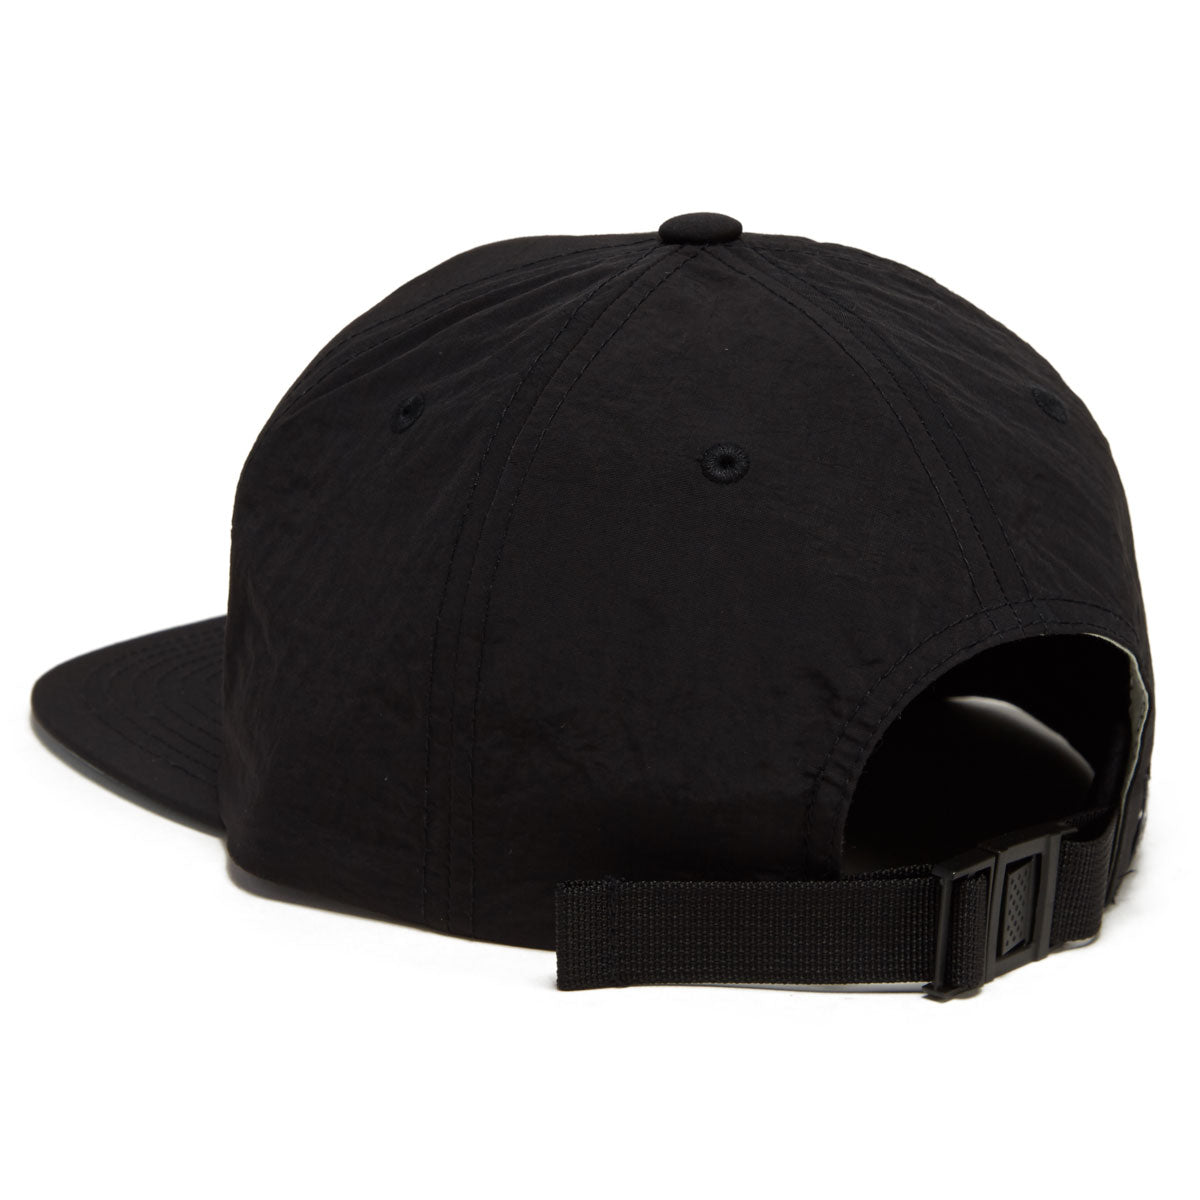 Salty Crew Clubhouse 5 Panel Hat - Black image 2